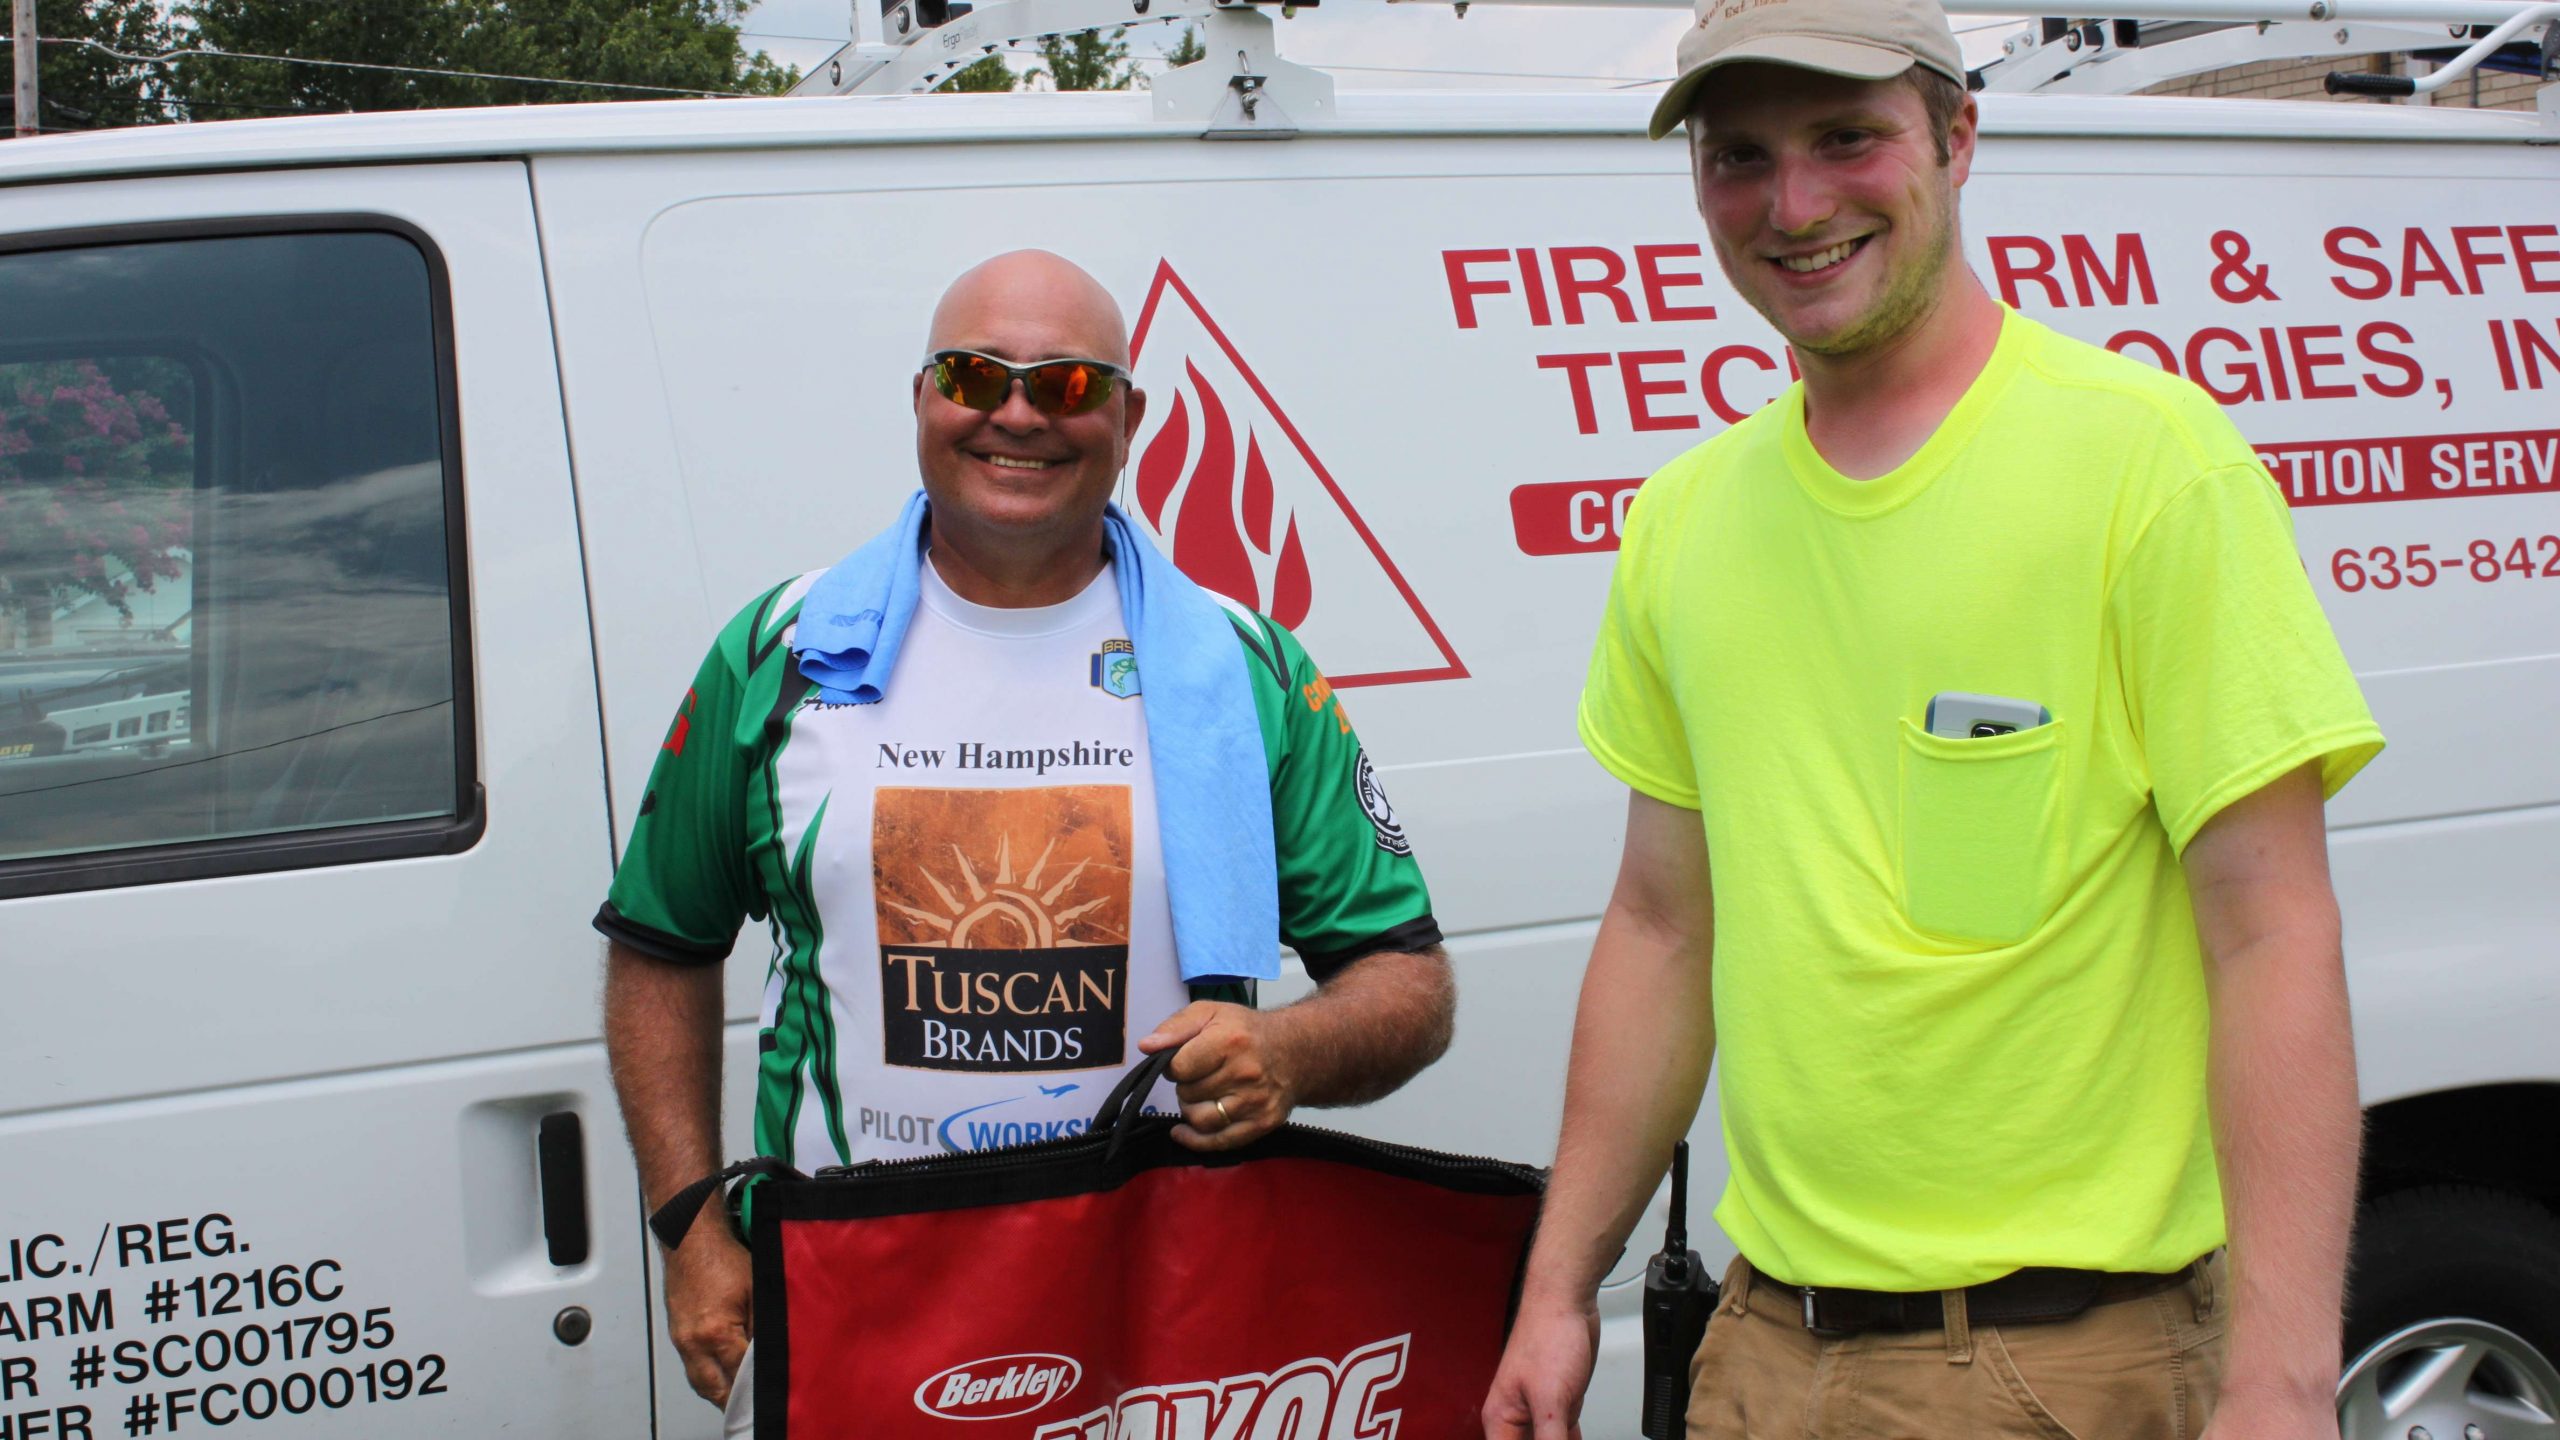 Kalem McMinn, right, of the Huntingdon Public Utilities Department, passed out weigh-in bags on Wednesday. Here he is with Team New Hampshire coach Adam Daniels.